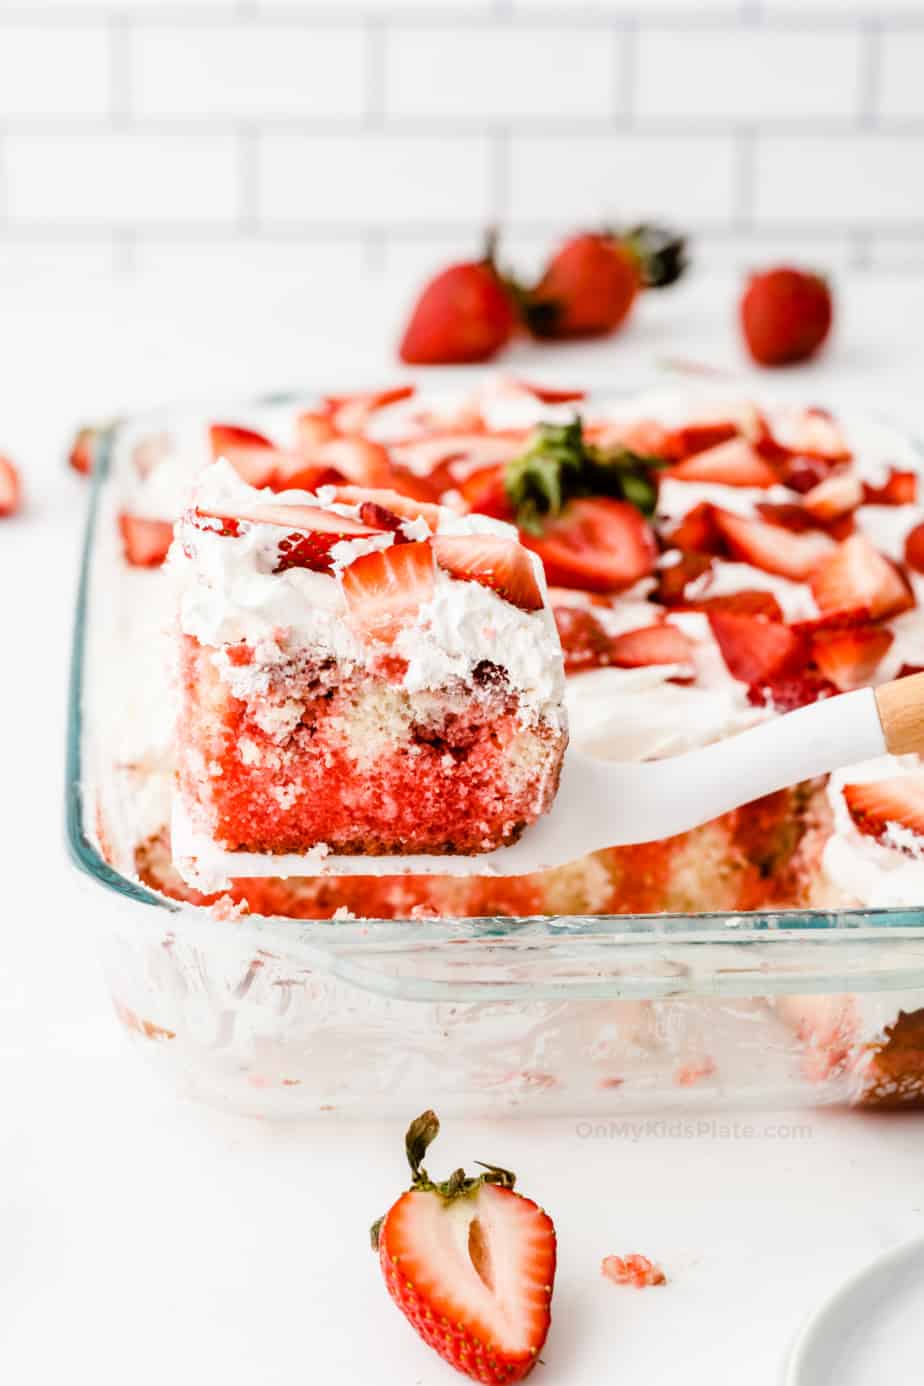 A slice of red and white swirled cake topped with strawberries being lifted out of a glass pan.